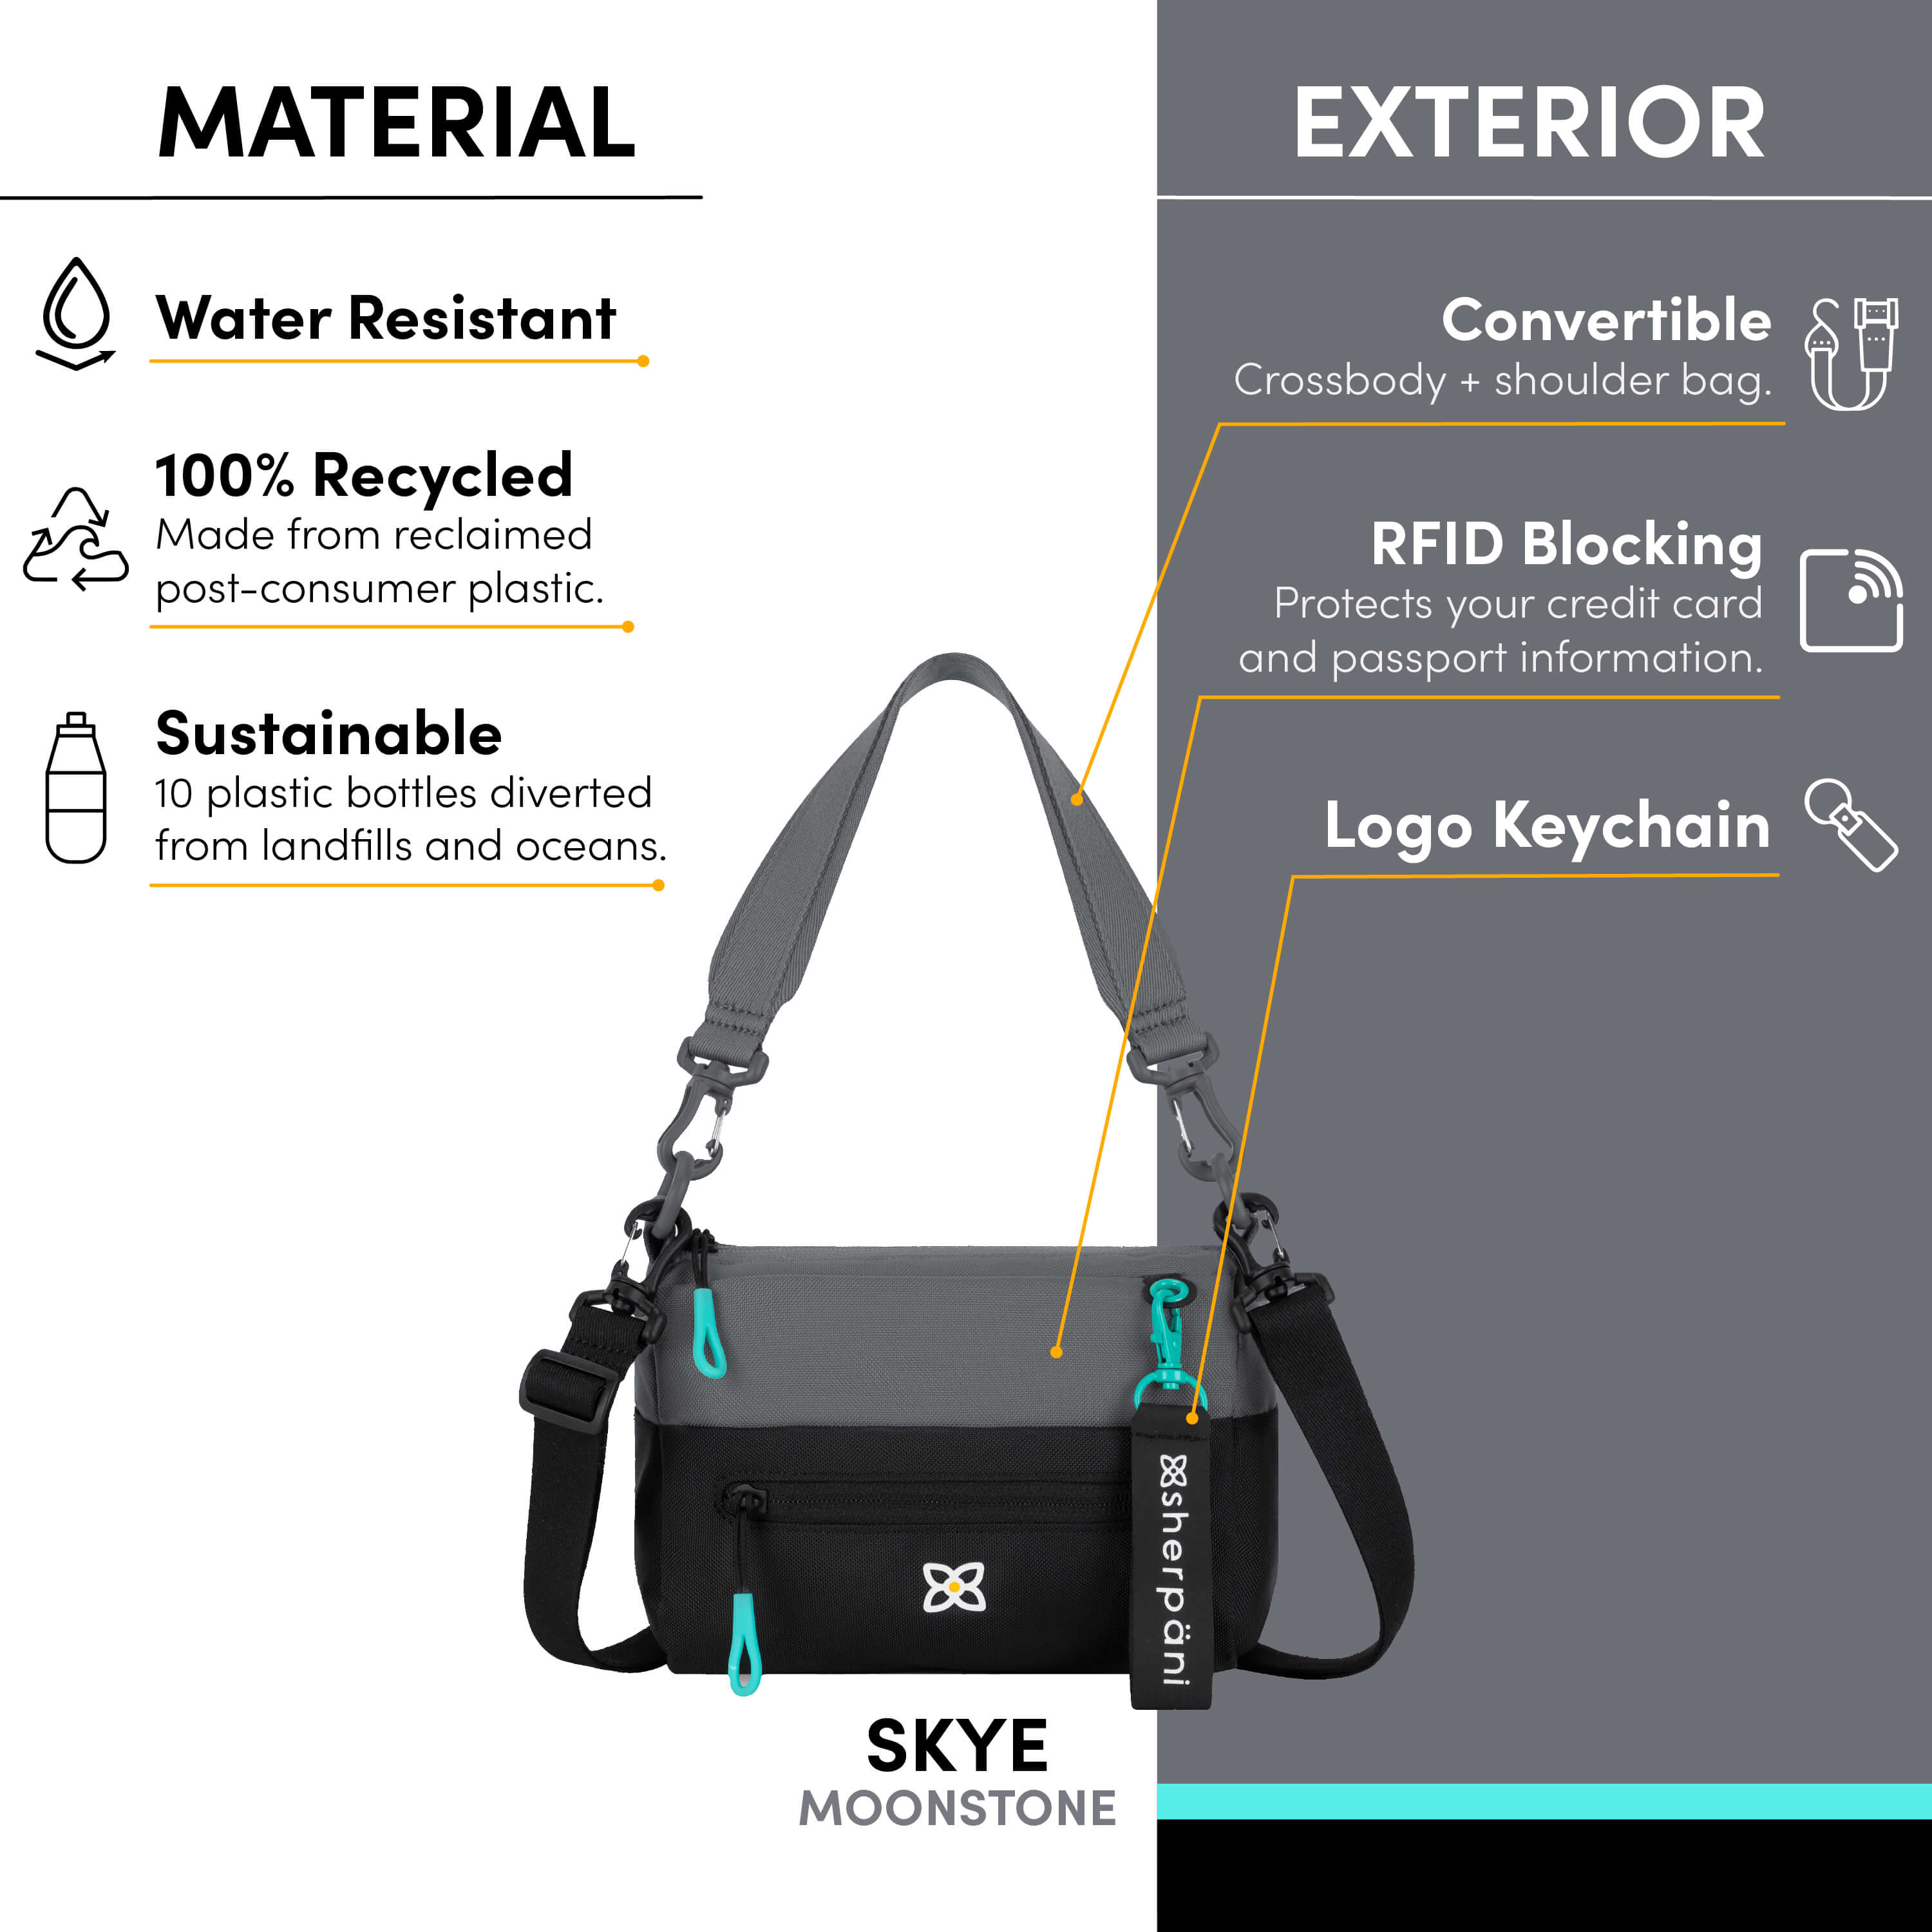 Graphic showing the features of Sherpani women&#39;s shoulder bag, the Skye: water-resistant purse, sustainable handbag made from recycled materials, two detachable strap options for two ways to style (shoulder bag, crossbody), RFID protection and Sherpani logo keychain.